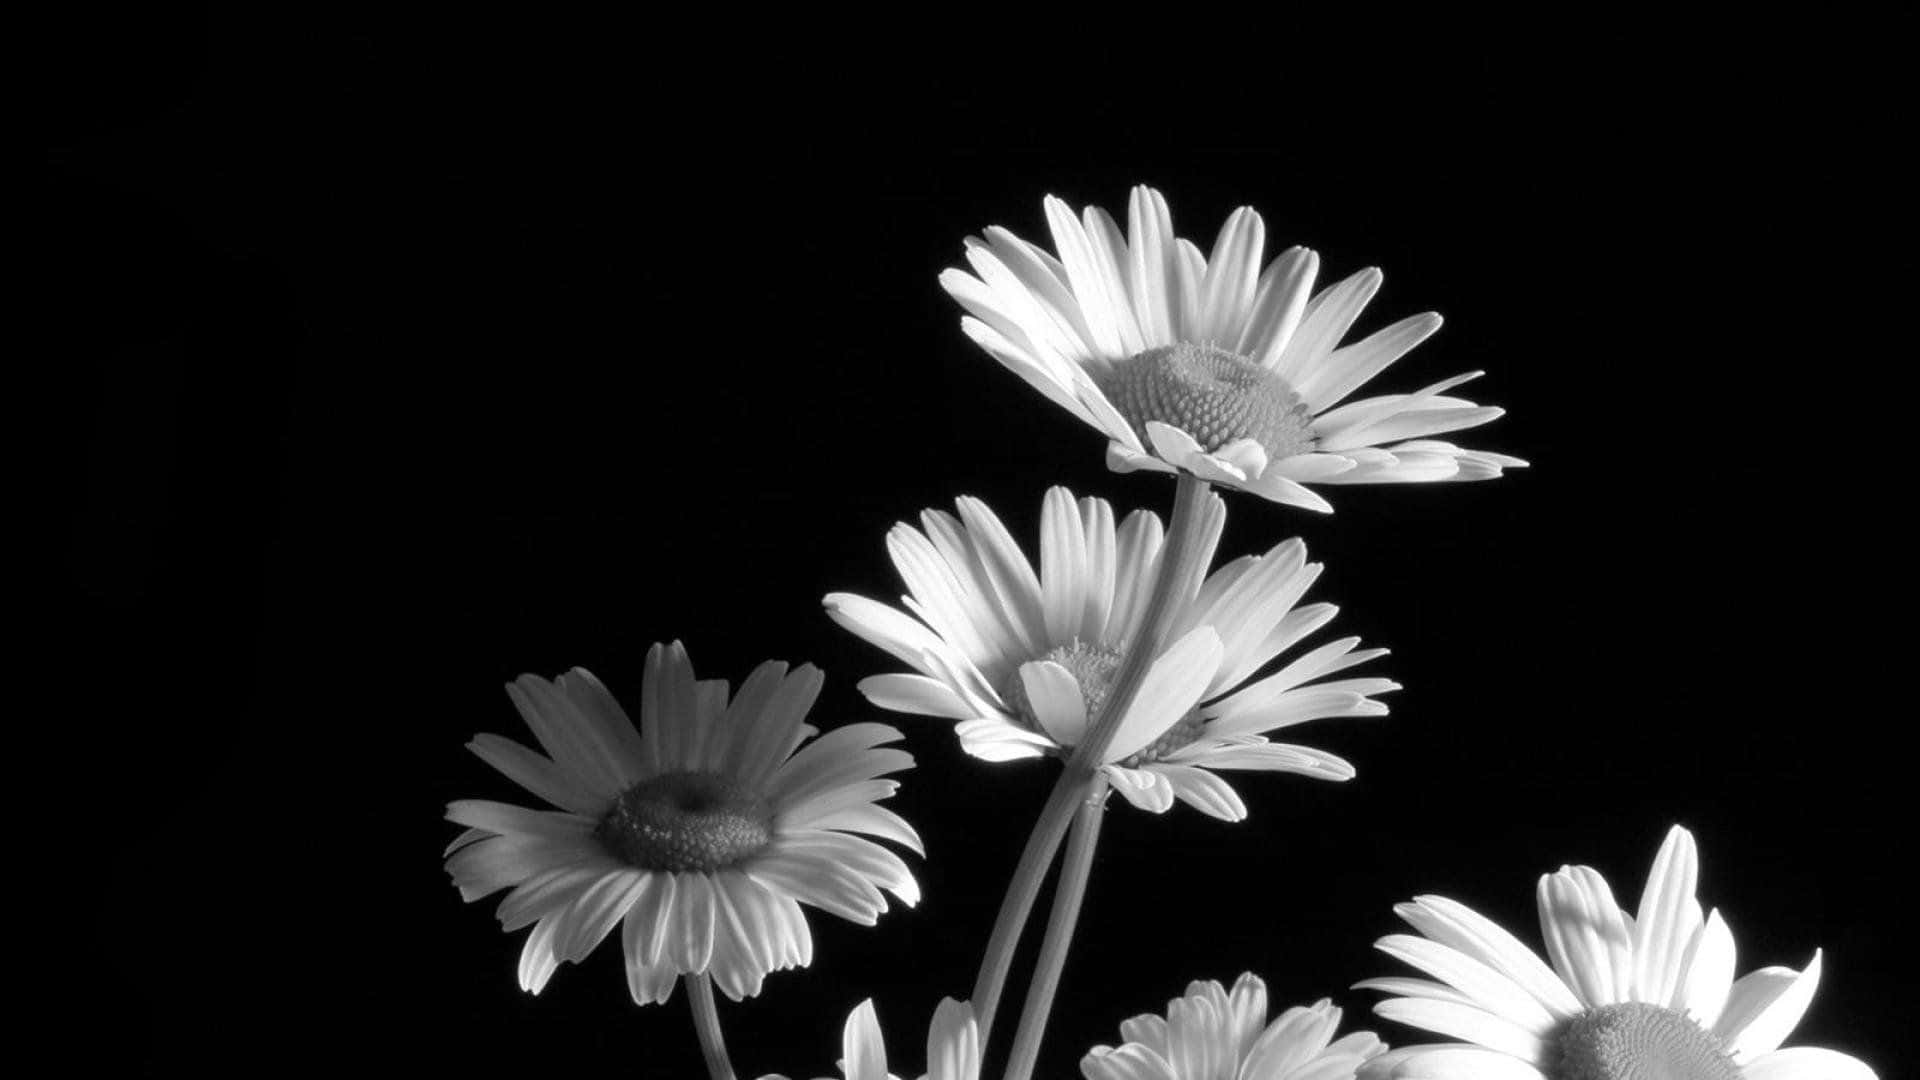 A beautiful black and white flower bringing contrast and harmony